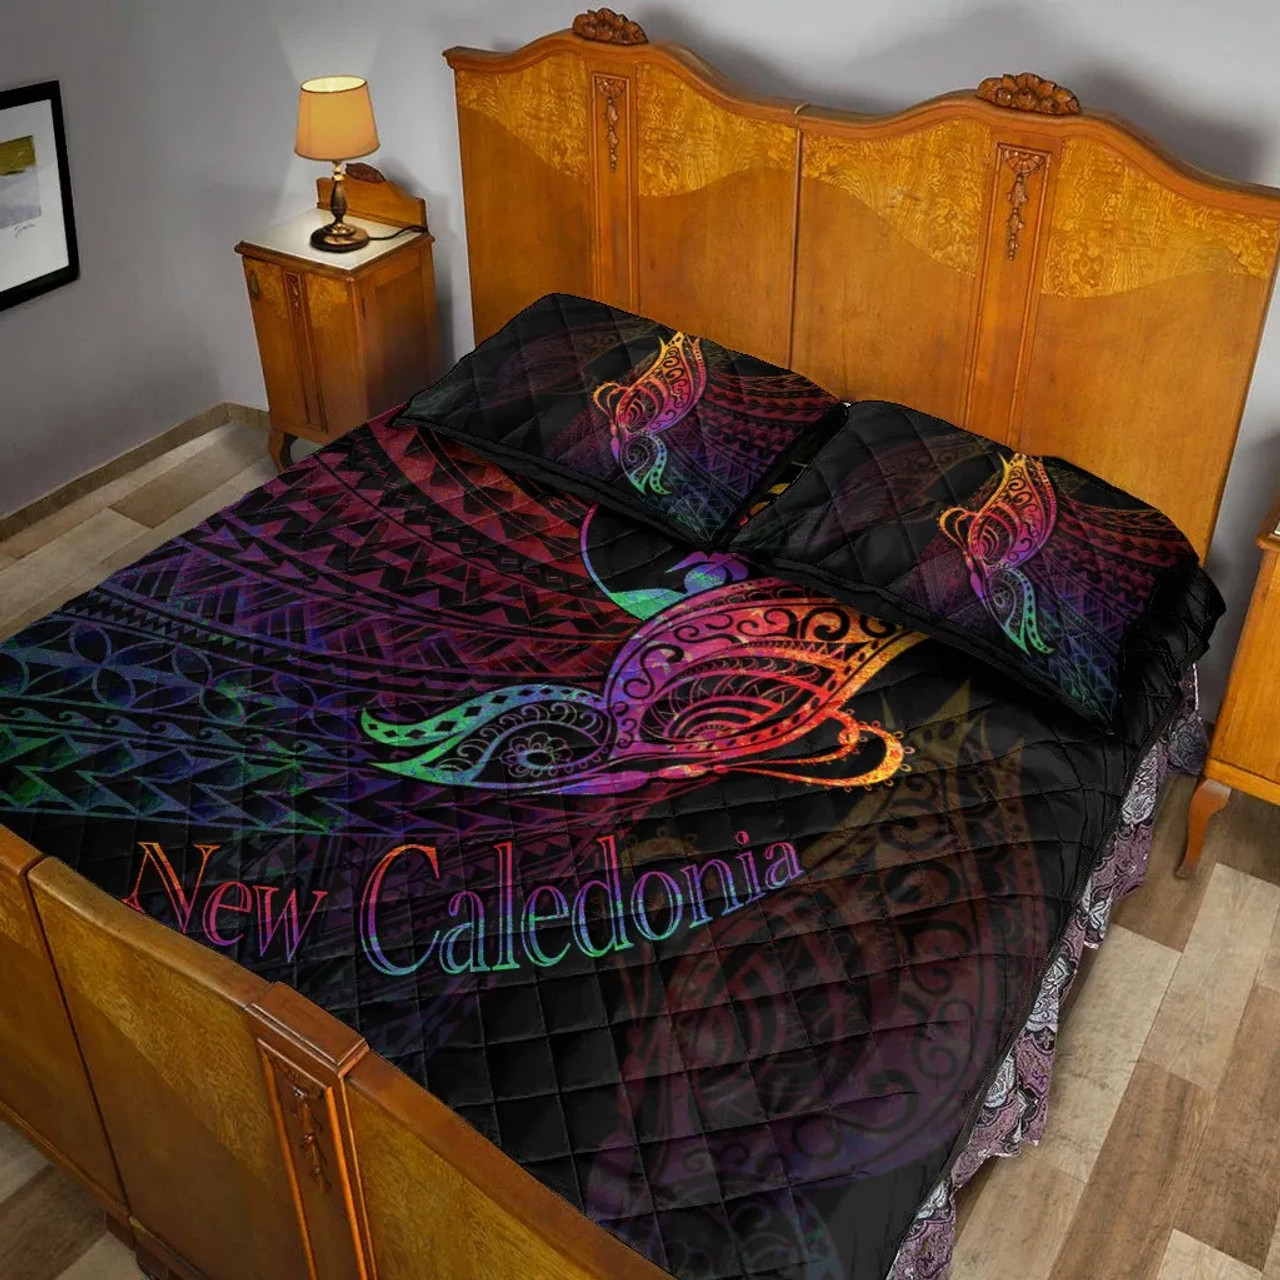 New Caledonia Quilt Bed Set - Butterfly Polynesian Style 4